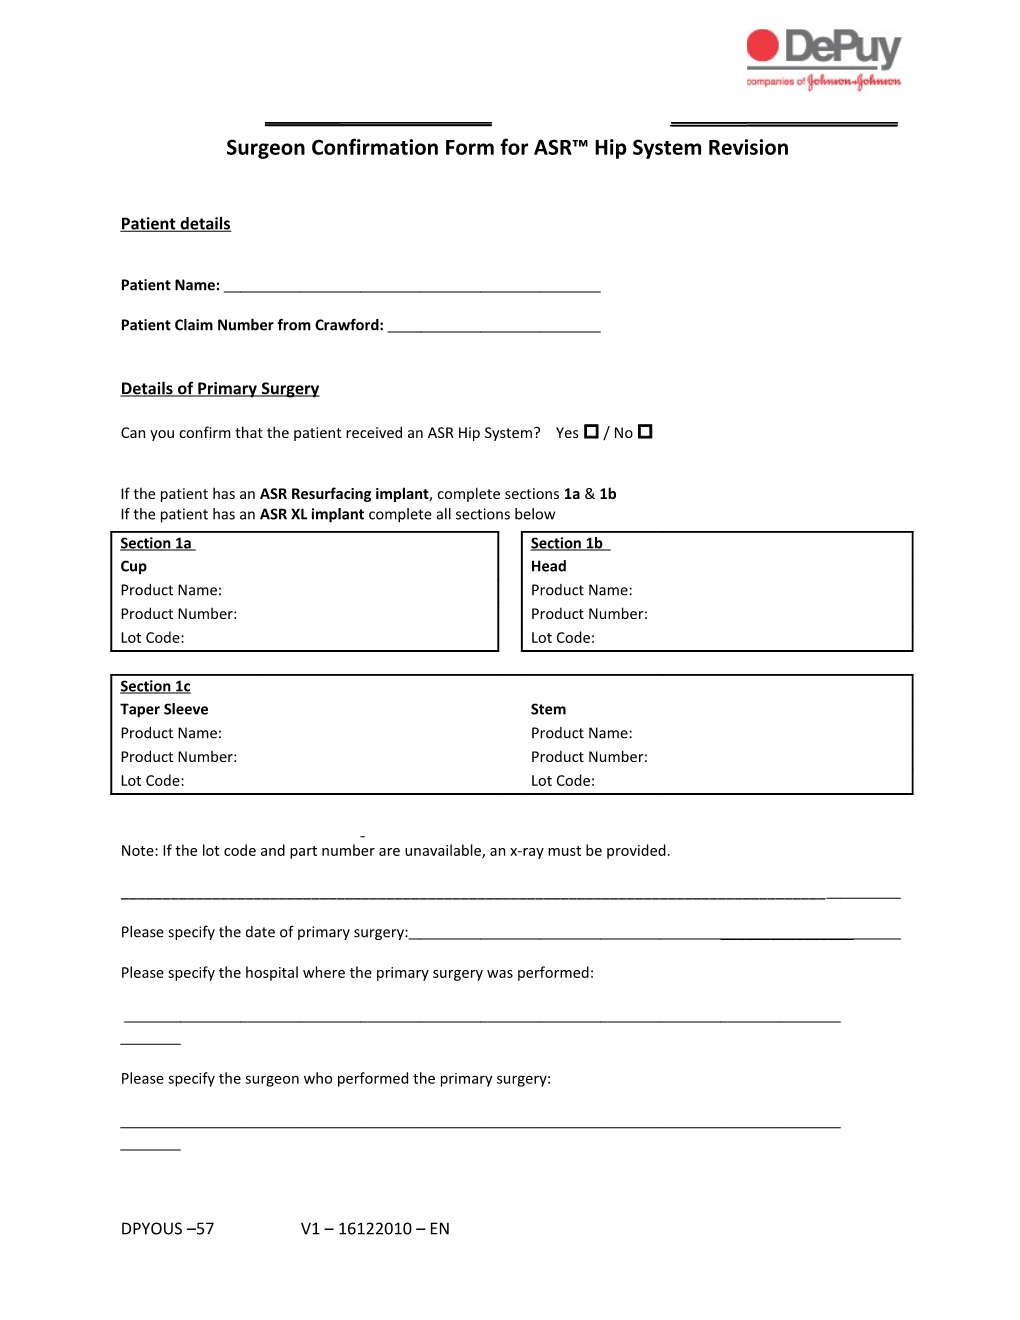 Surgeon Confirmation Form for ASR Hip System Revision